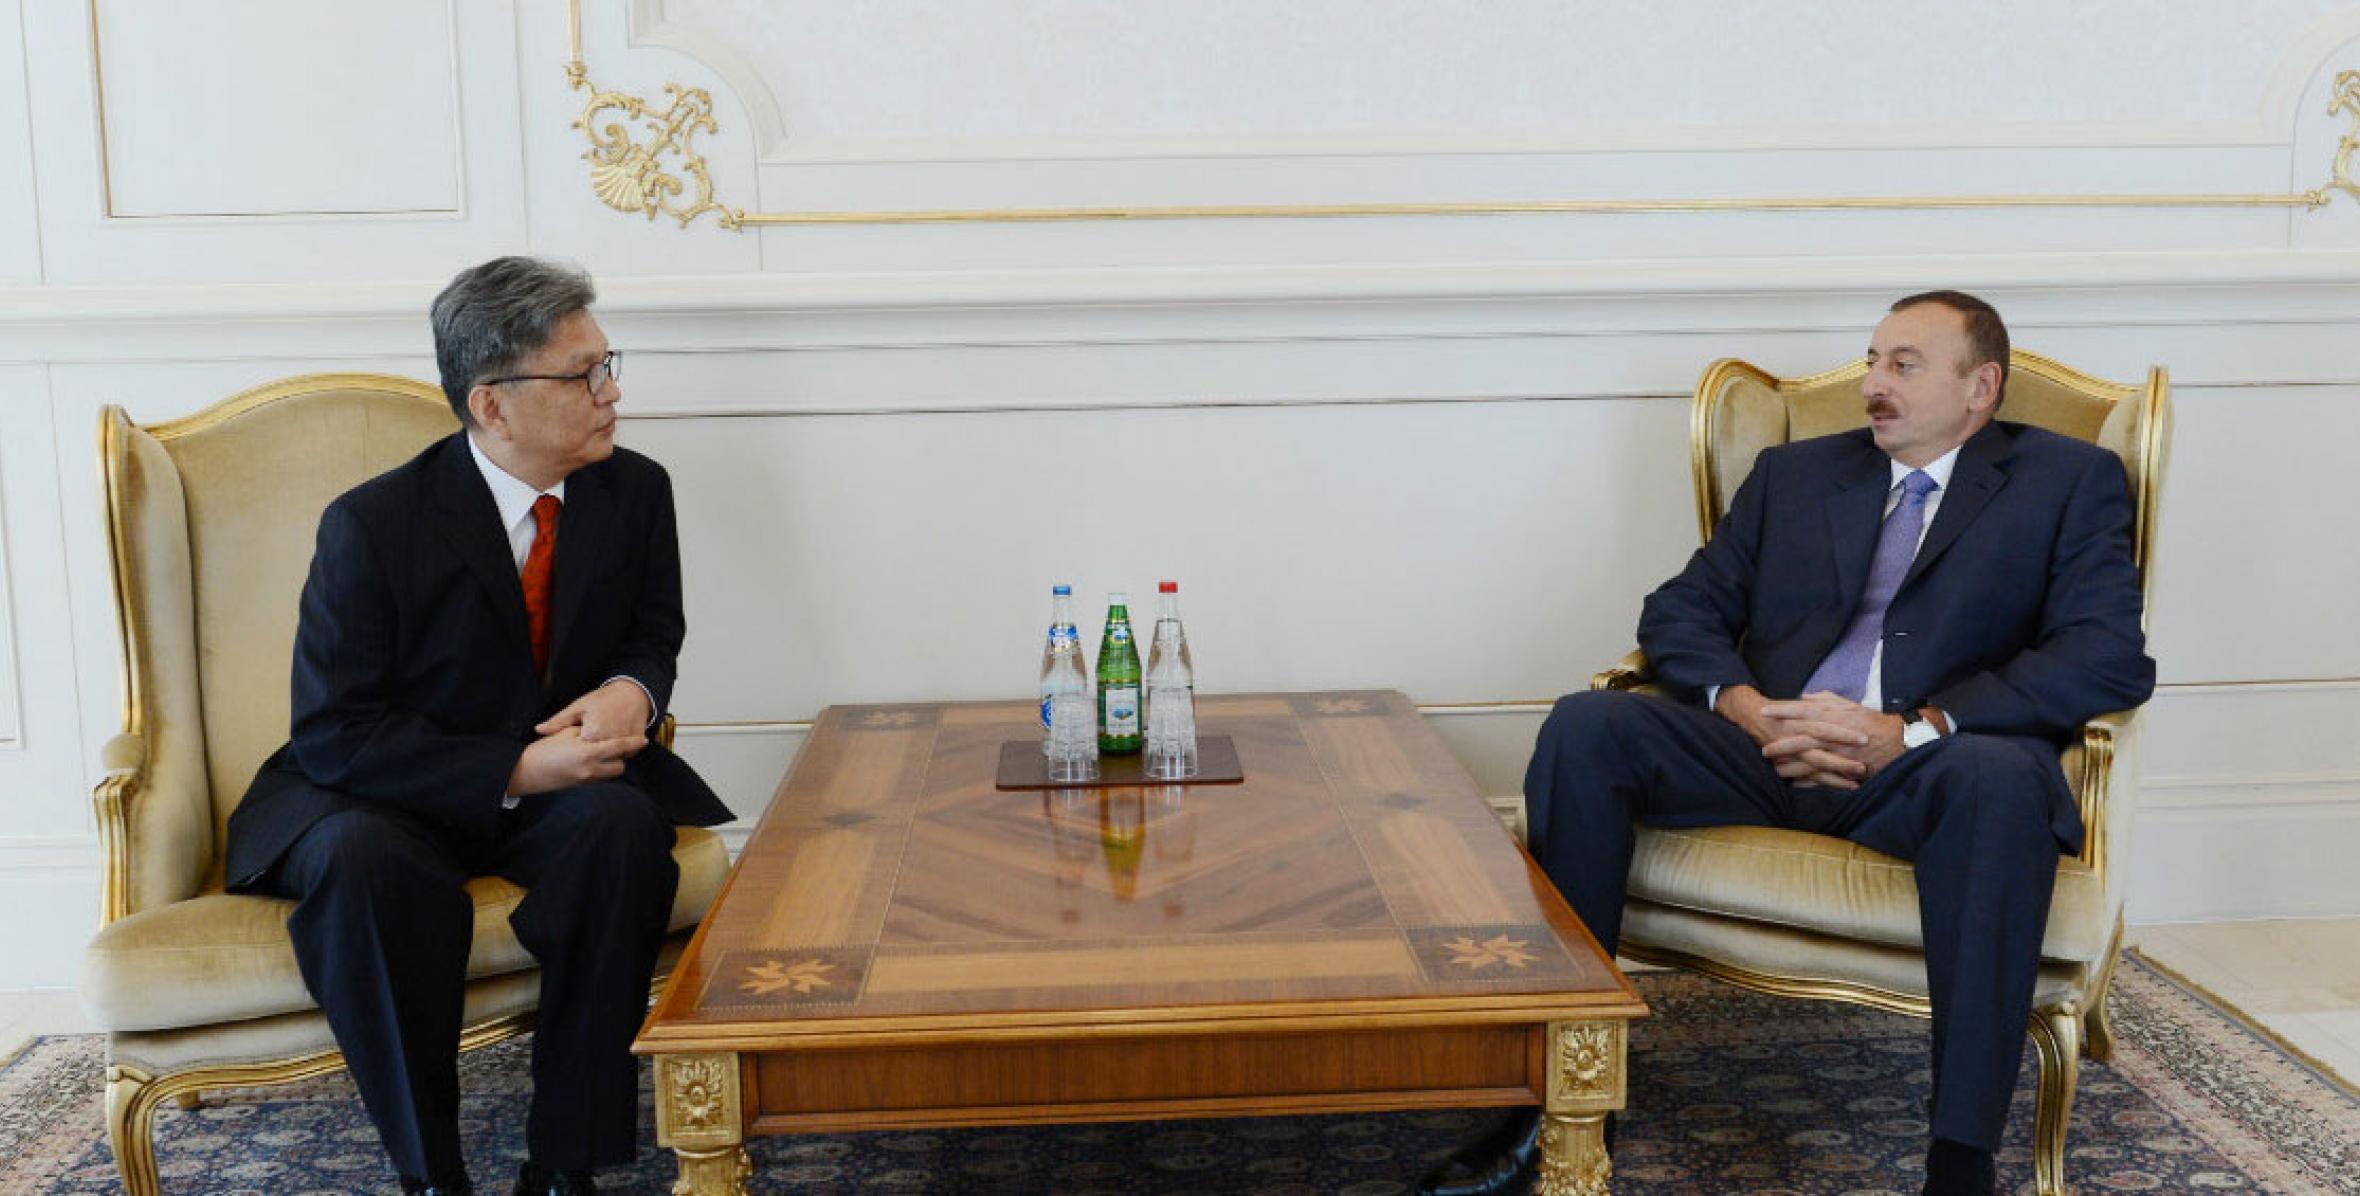 Ilham Aliyev accepted the credentials of the newly-appointed Ambassador of the Republic of Korea to the Republic of Azerbaijan, Choi Suk-inn